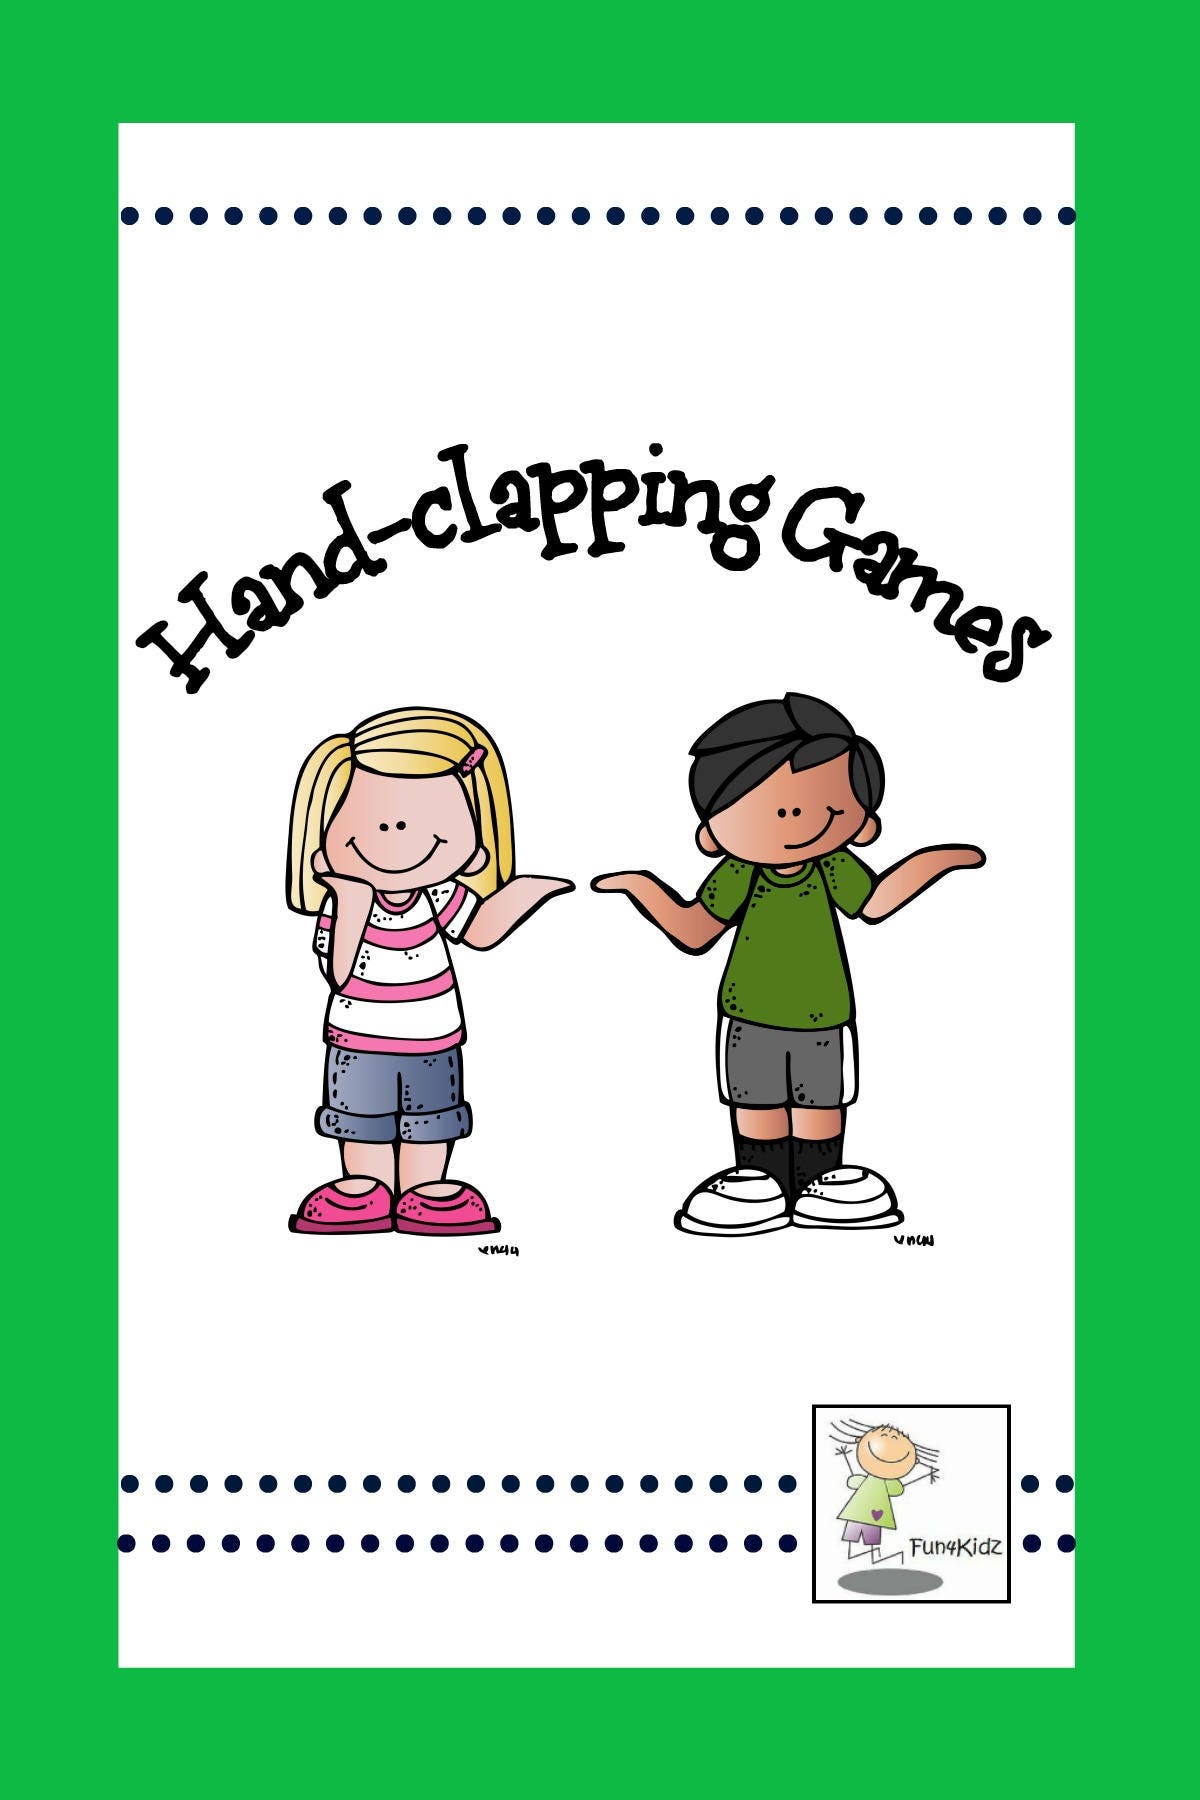 10 Classic Hand-Clapping Games To Teach Your Kids (And Relive